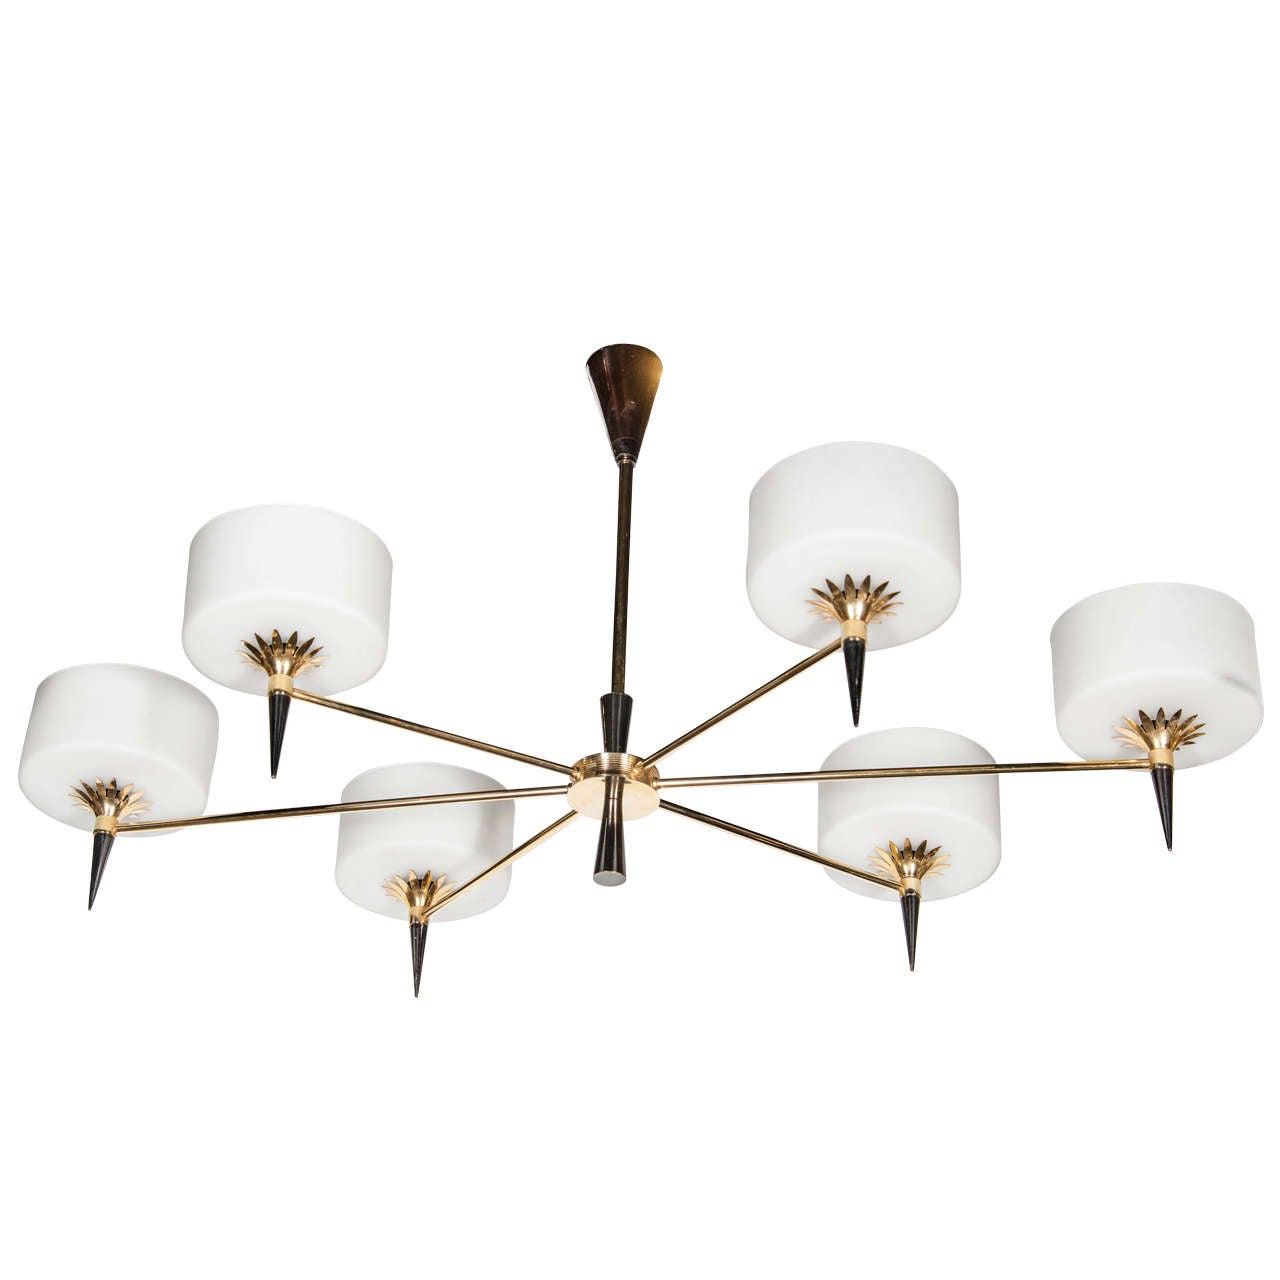 Sophisticated Art Deco Directoire Style Chandelier in the Manner of Adnet